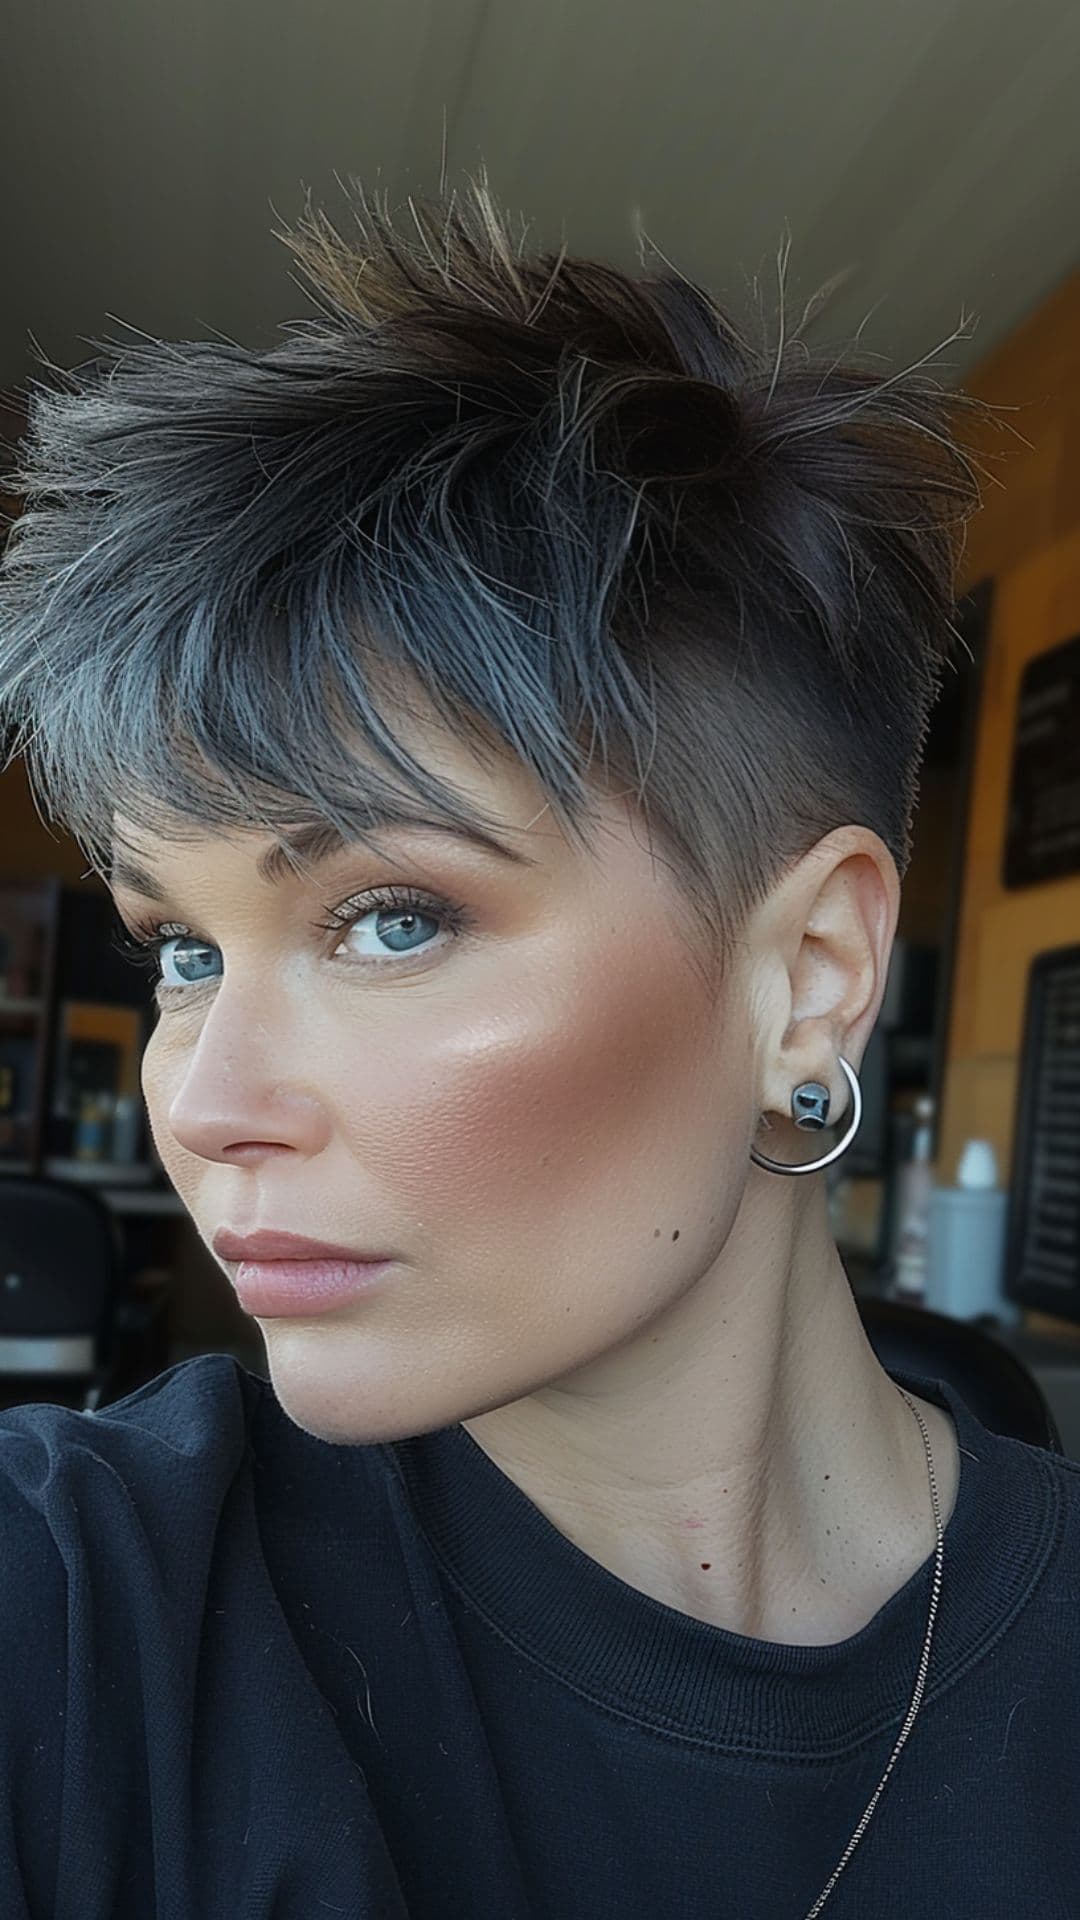 A woman modelling an edgy pixie cut with shaved sides.